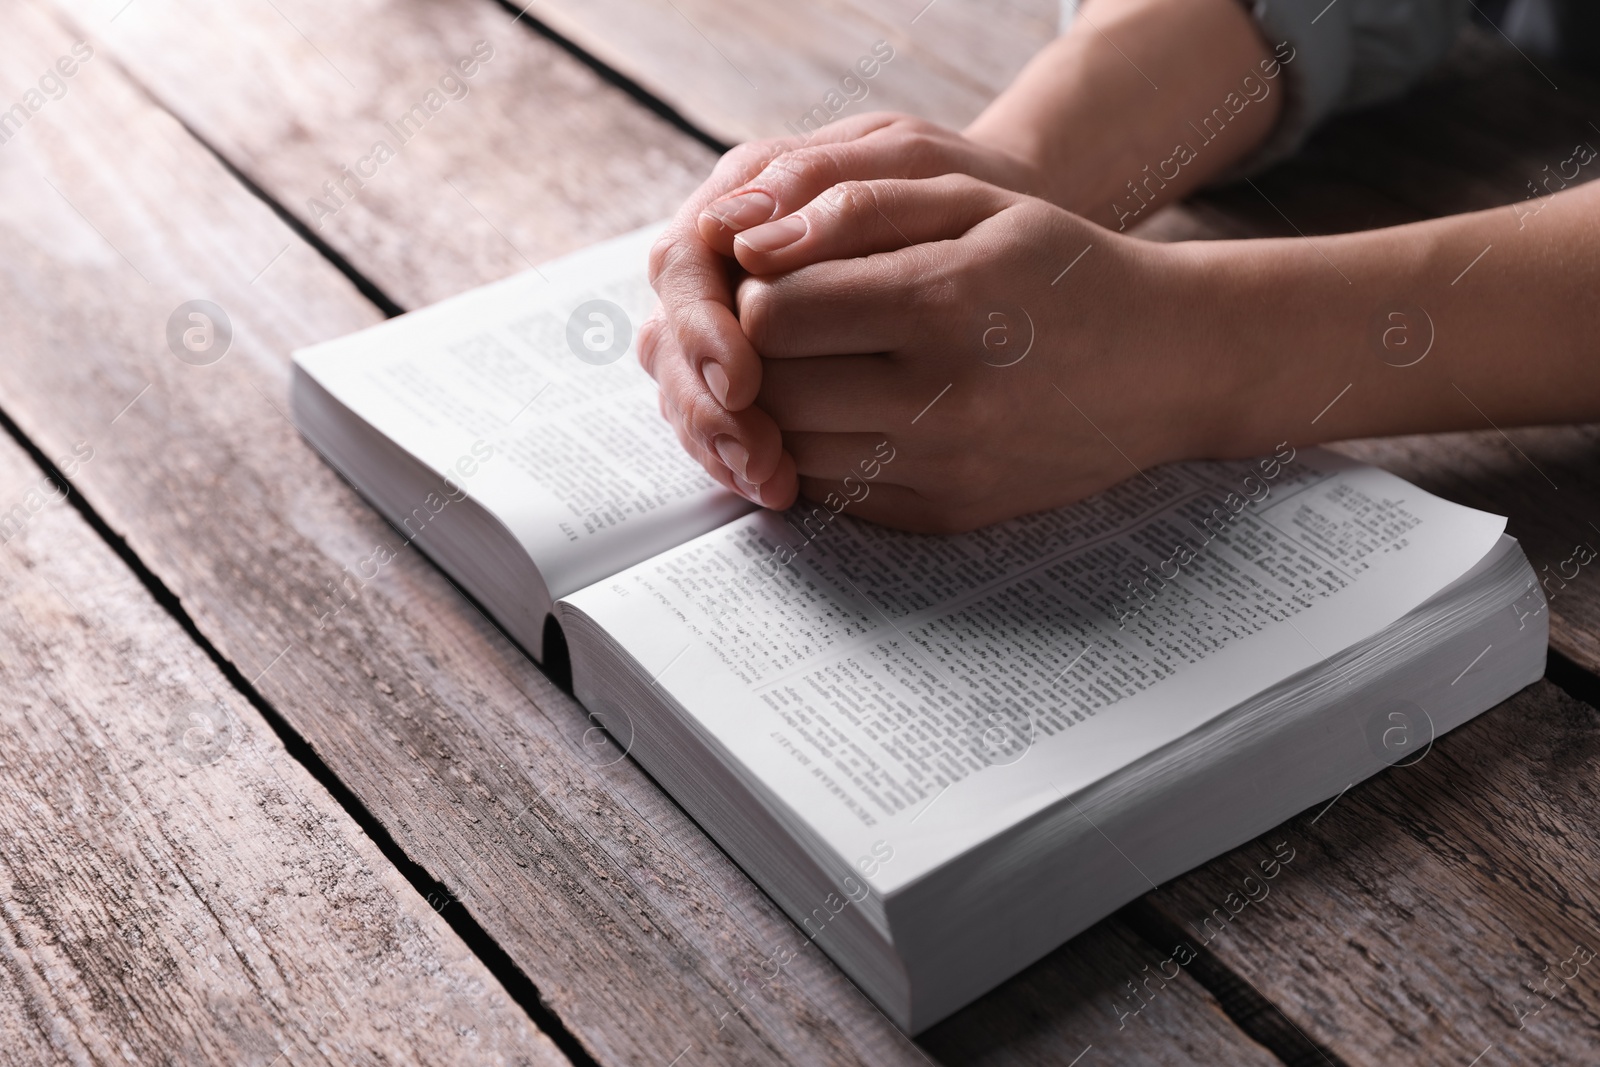 Photo of Religion. Christian woman praying over Bible at wooden table, closeup